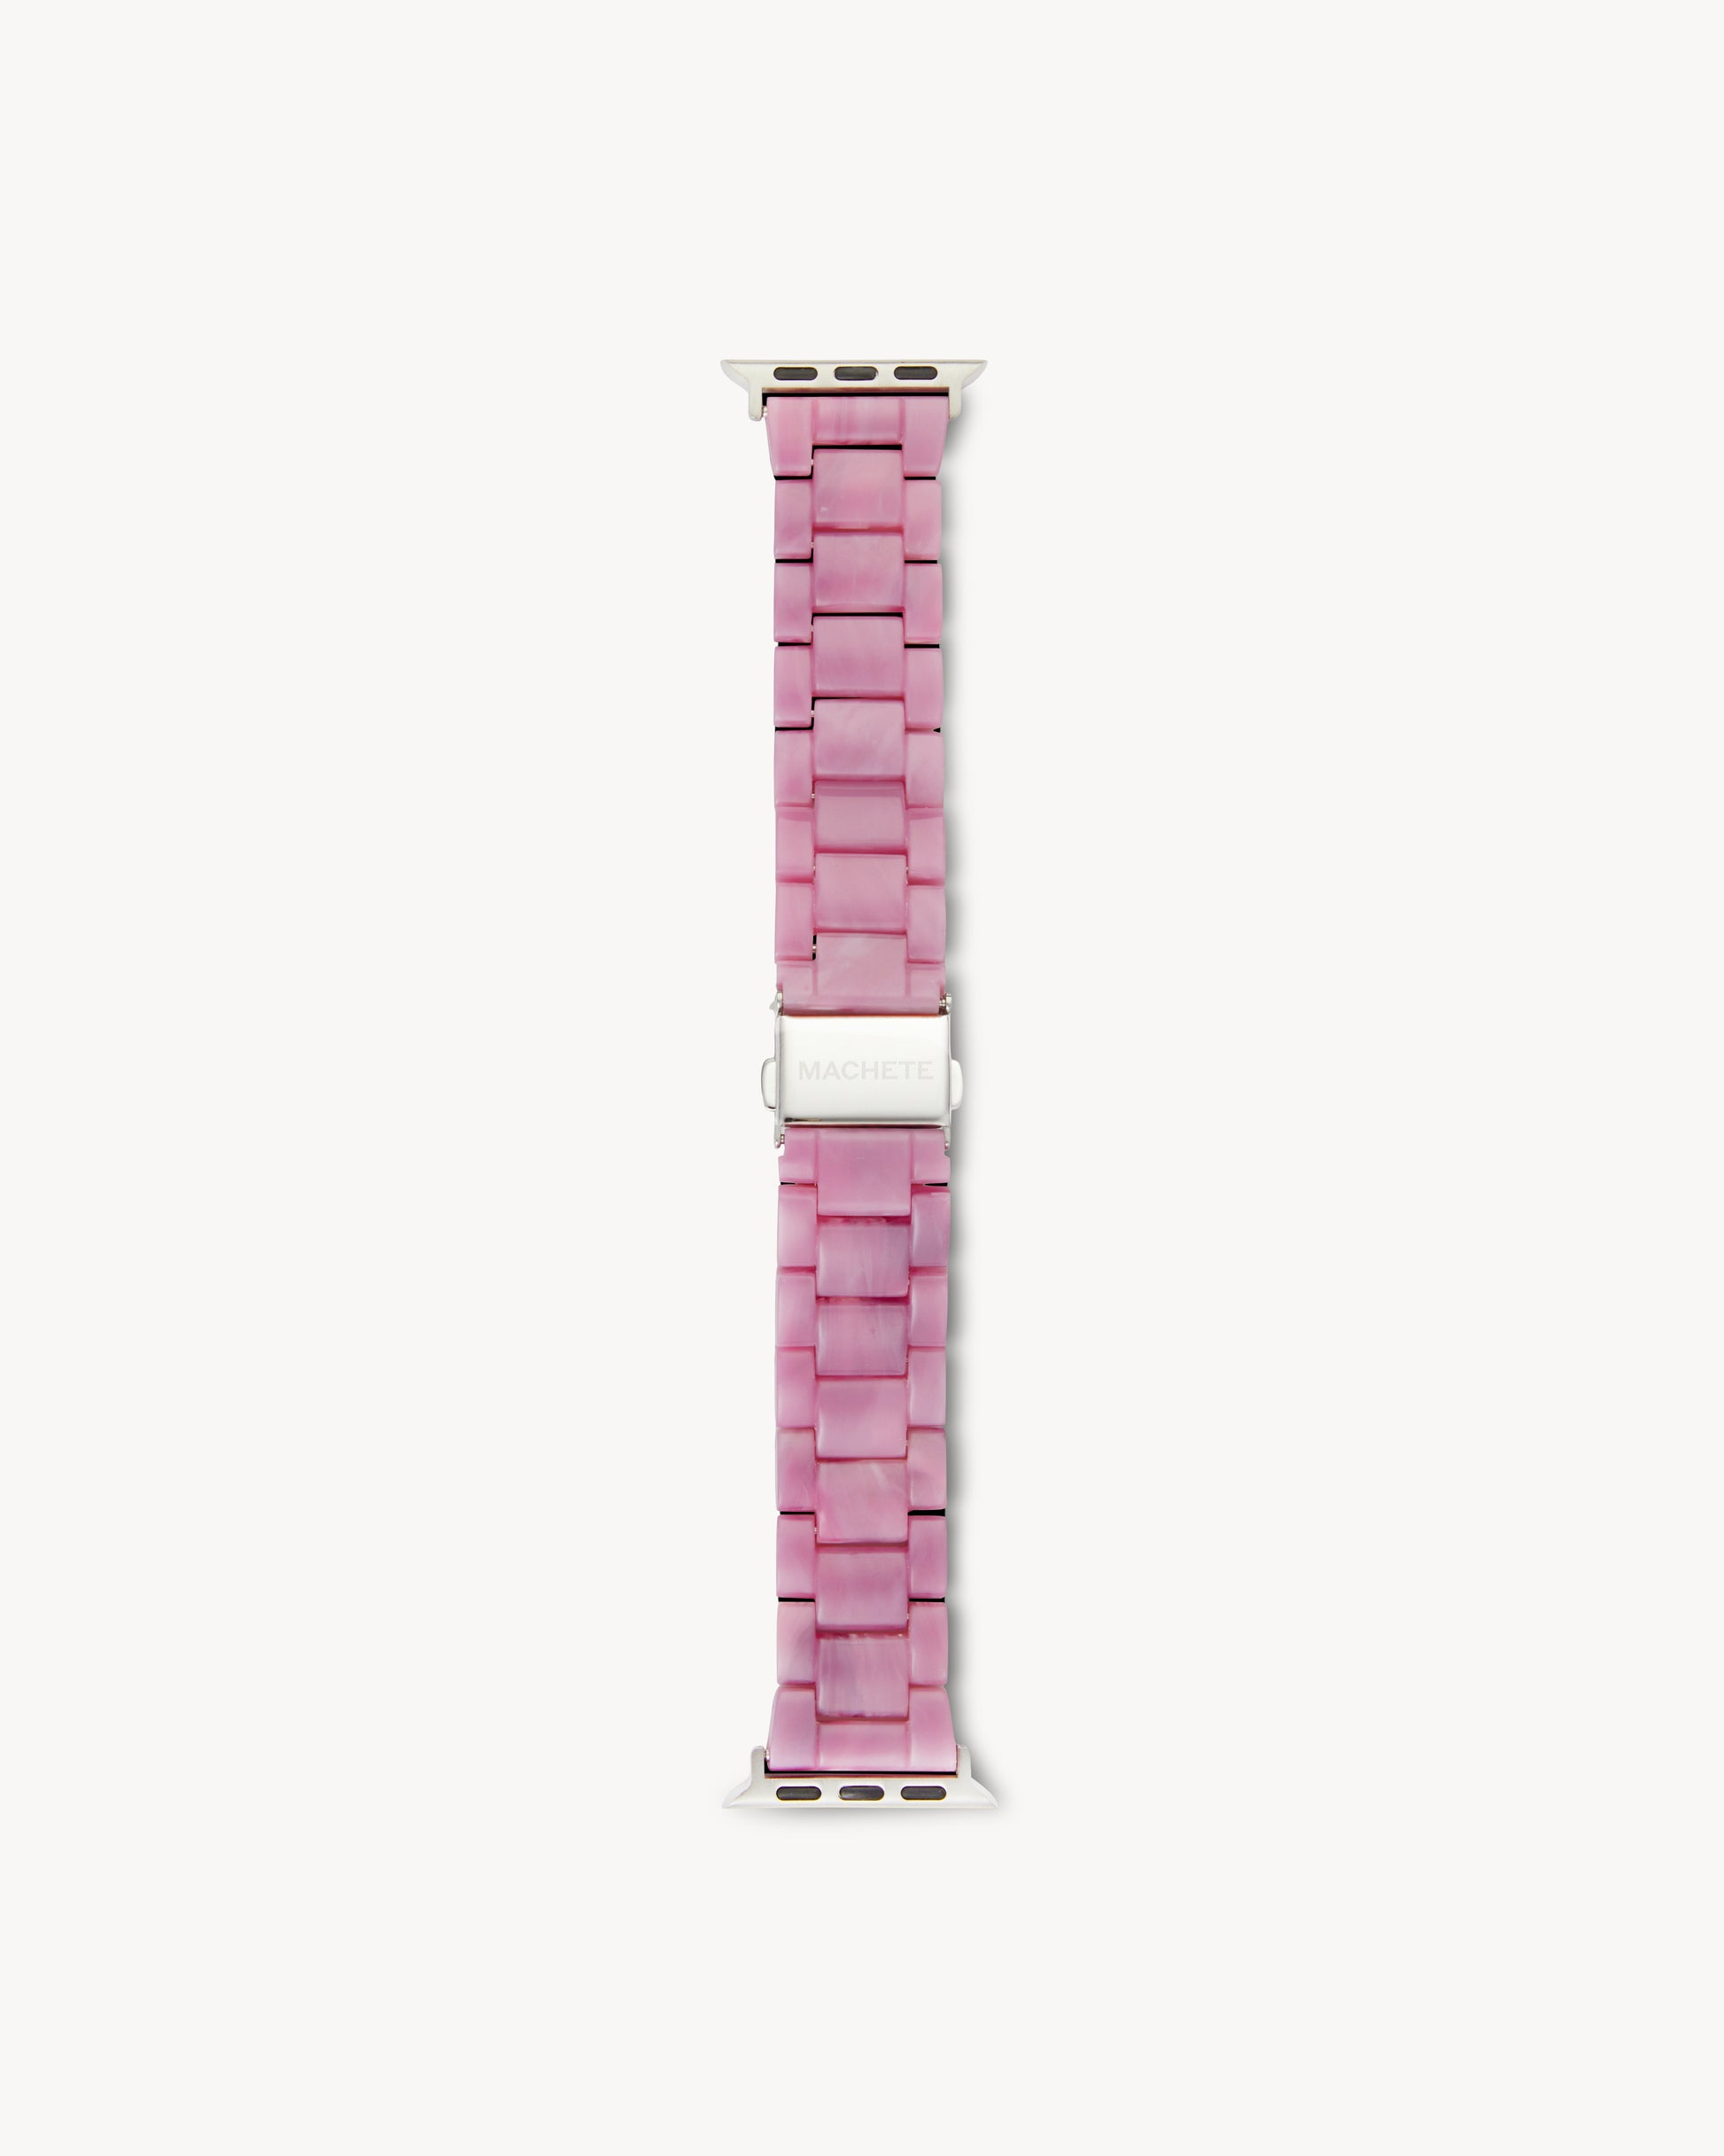 MACHETE Apple Watch Band in Orchid